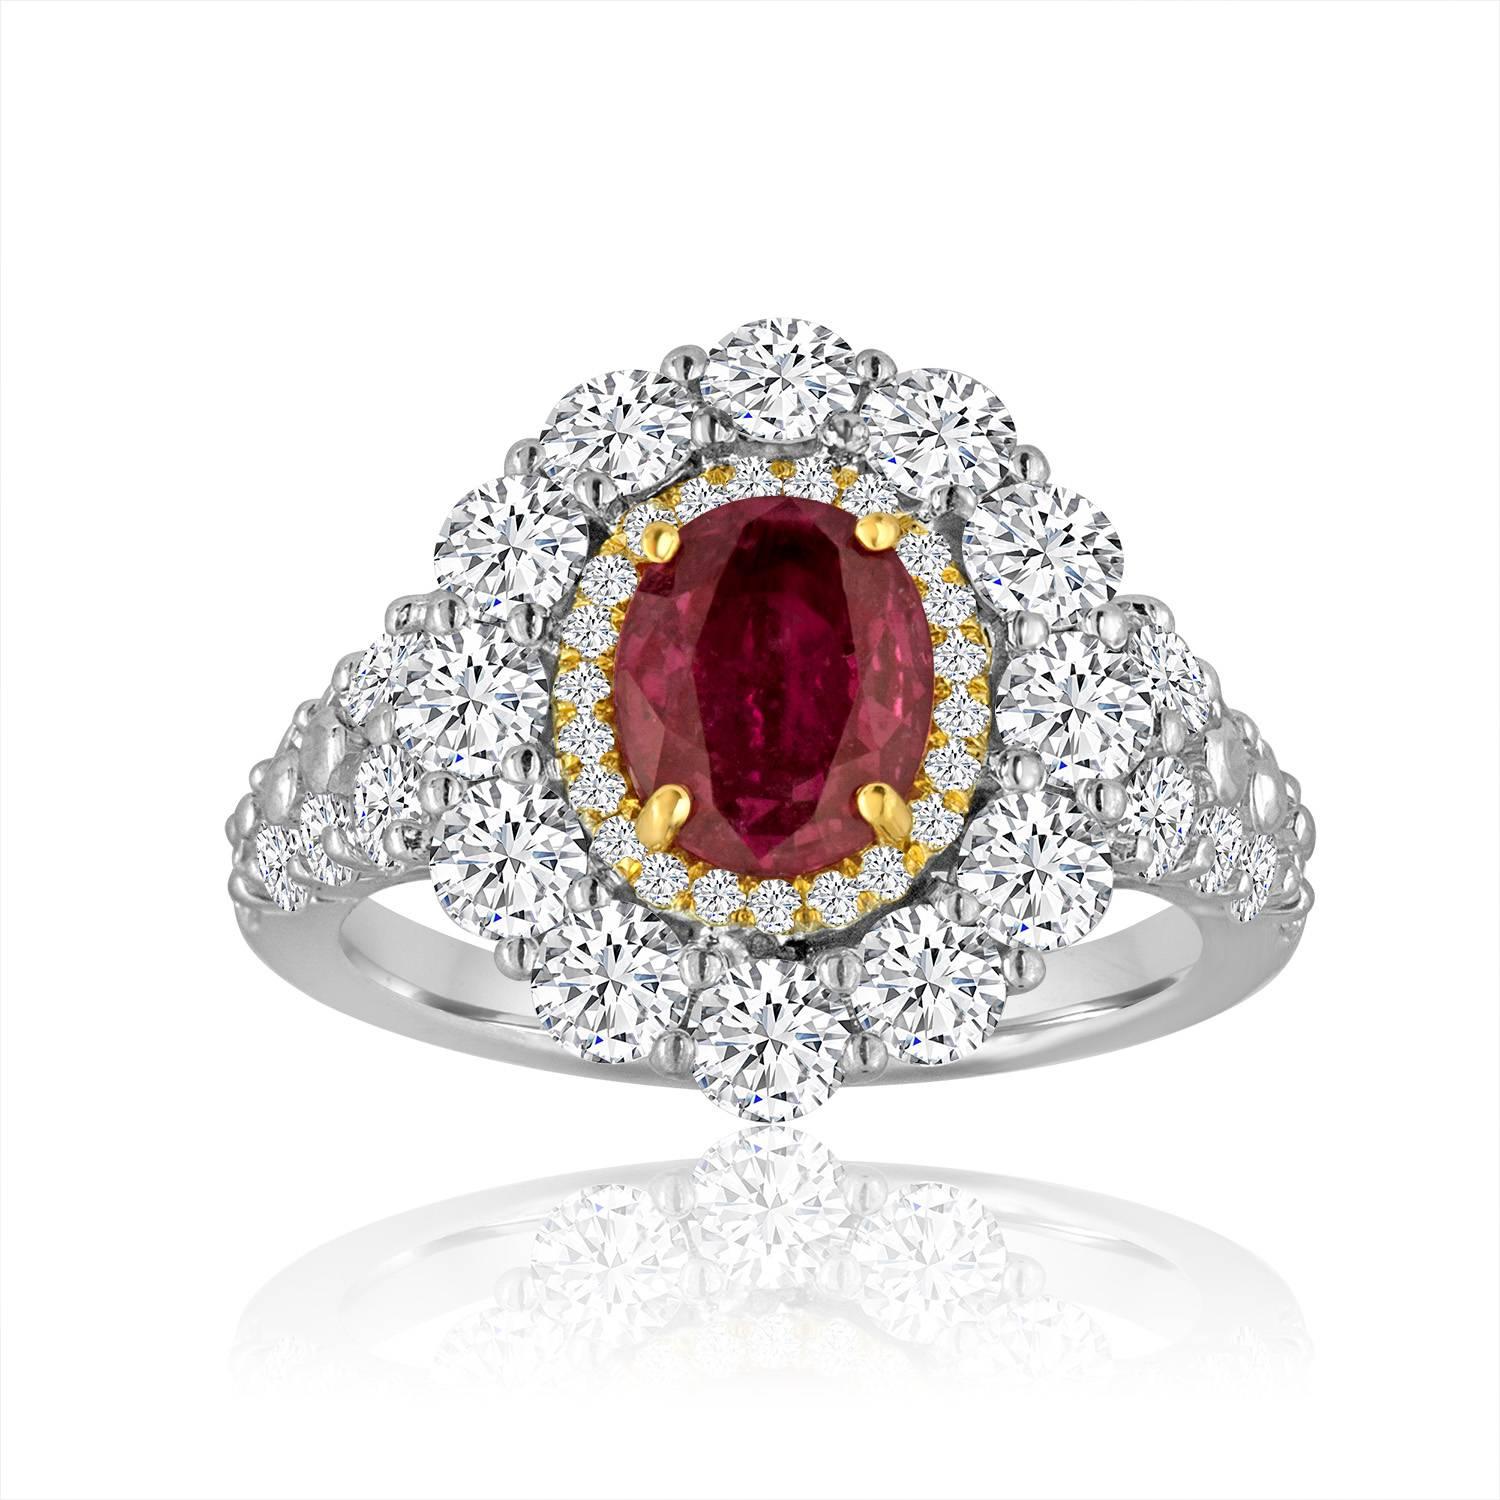 One of a kind GIA Certified No Heat Madagascar Ruby Oval 1.84 carat in Double Halo of White Diamond 2.60 Carat in 18K White and Yellow Gold Ring.

Style available in different price ranges. Prices are based on your selection of 4C's Cut, Color,